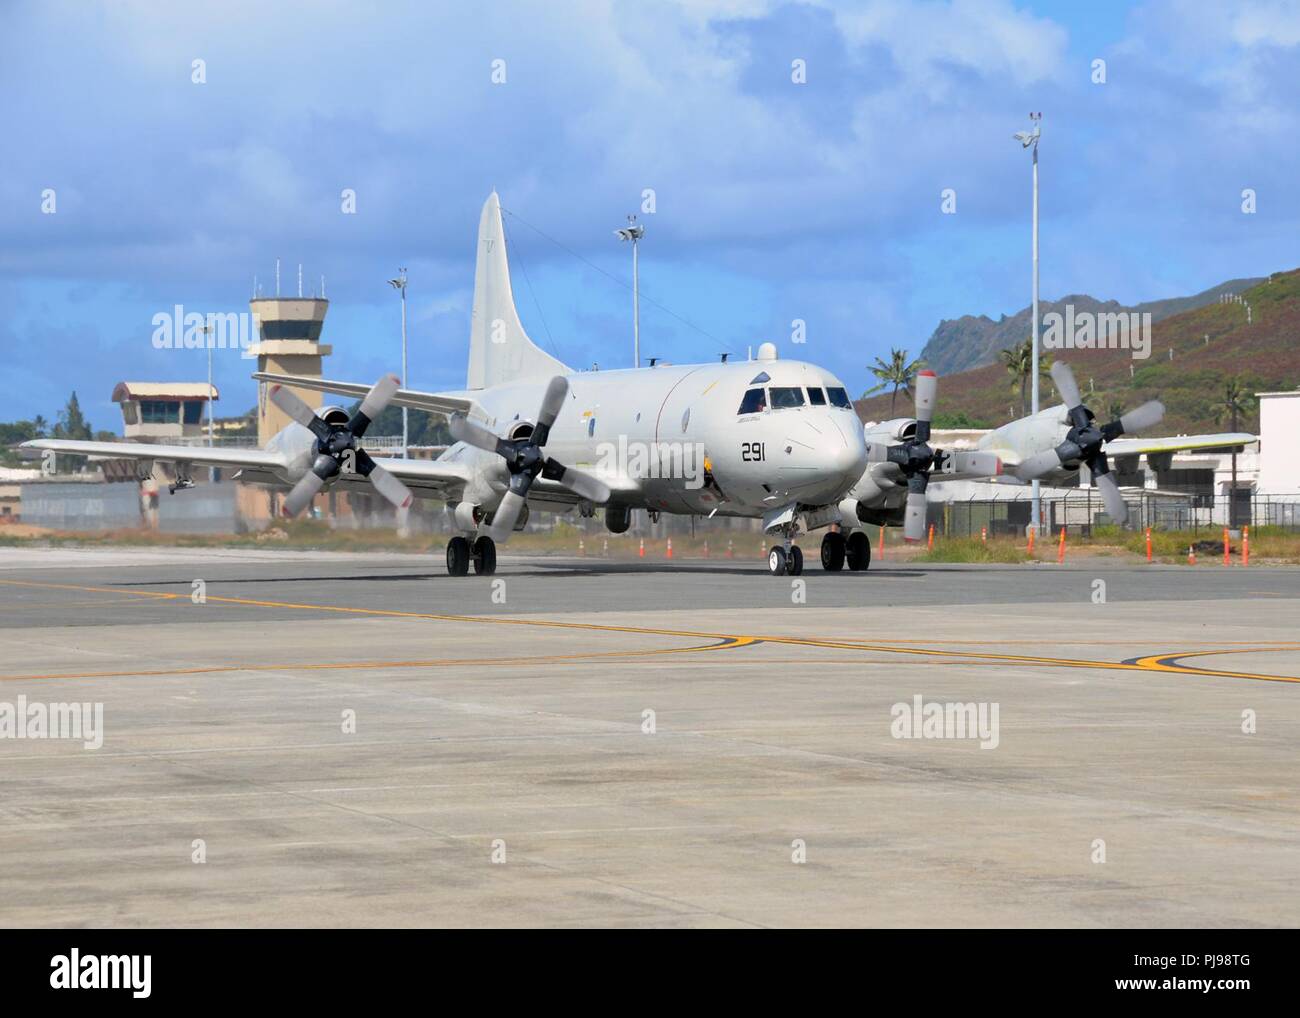 MARINE CORPS BASE HAWAII (July 5, 2018) — A Patrol Squadron (VP) 46 P-3C Orion arrives on Marine Corps Base Hawaii for Rim of the Pacific (RIMPAC) Exercise. Twenty-five nations, more than 46 ships and 5 submarines, about 200 aircraft, and 25,000 personnel are participating in RIMPAC from June 27 to Aug. 2 in and around the Hawaiian Islands and Southern California. The world's largest international maritime exercise, RIMPAC provides a unique training opportunity while fostering and sustaining cooperative relationships among participants critical to ensuring the safety of sea lanes and security  Stock Photo